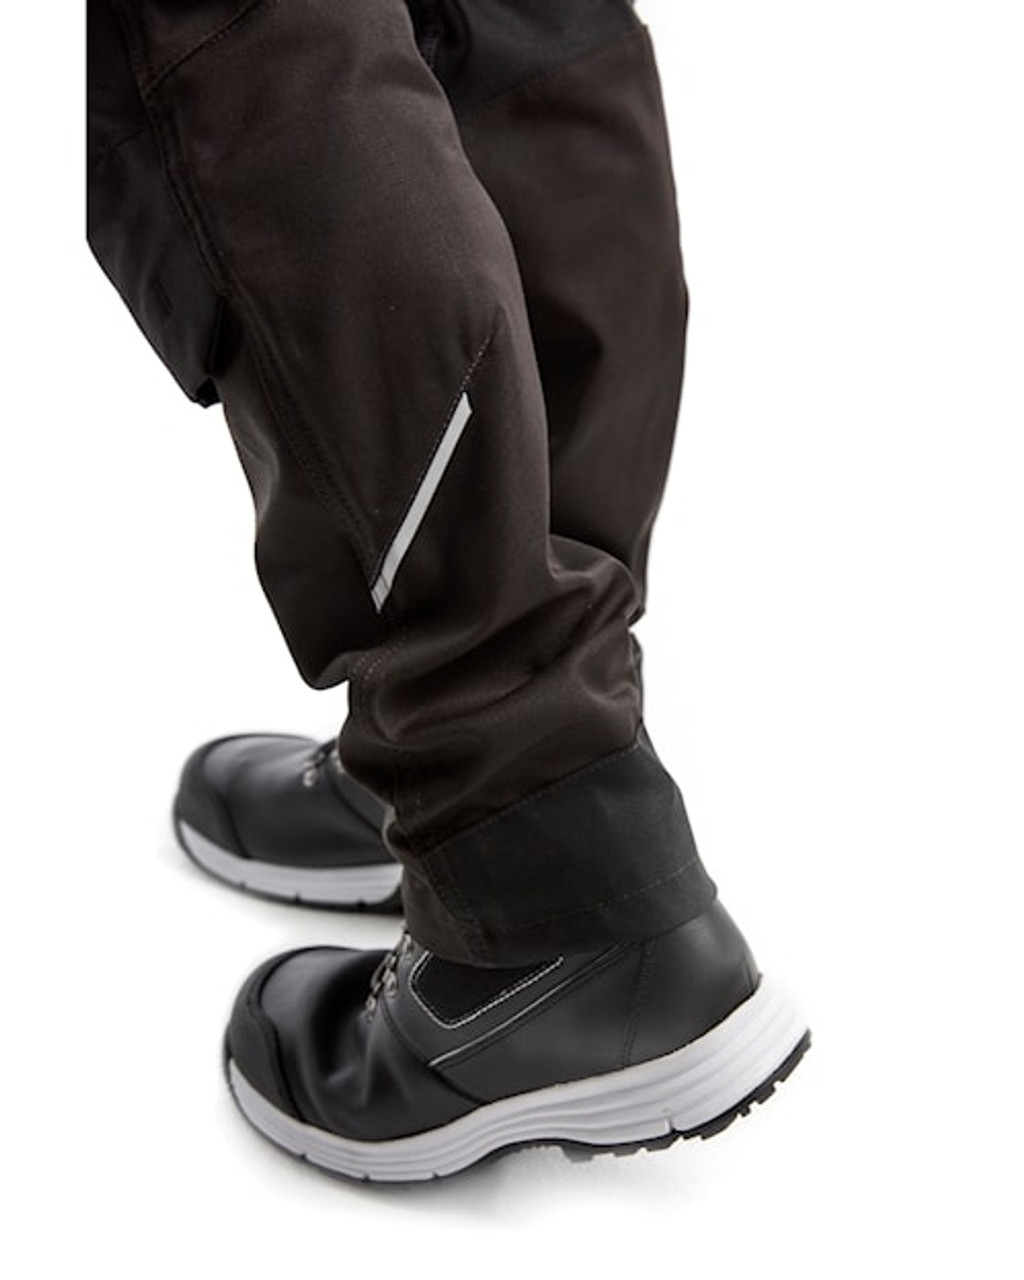 BLAKLADER Trousers | 1590 Trousers with Holster Pockets for Mens Workwear, Plumbers and  in Hobart